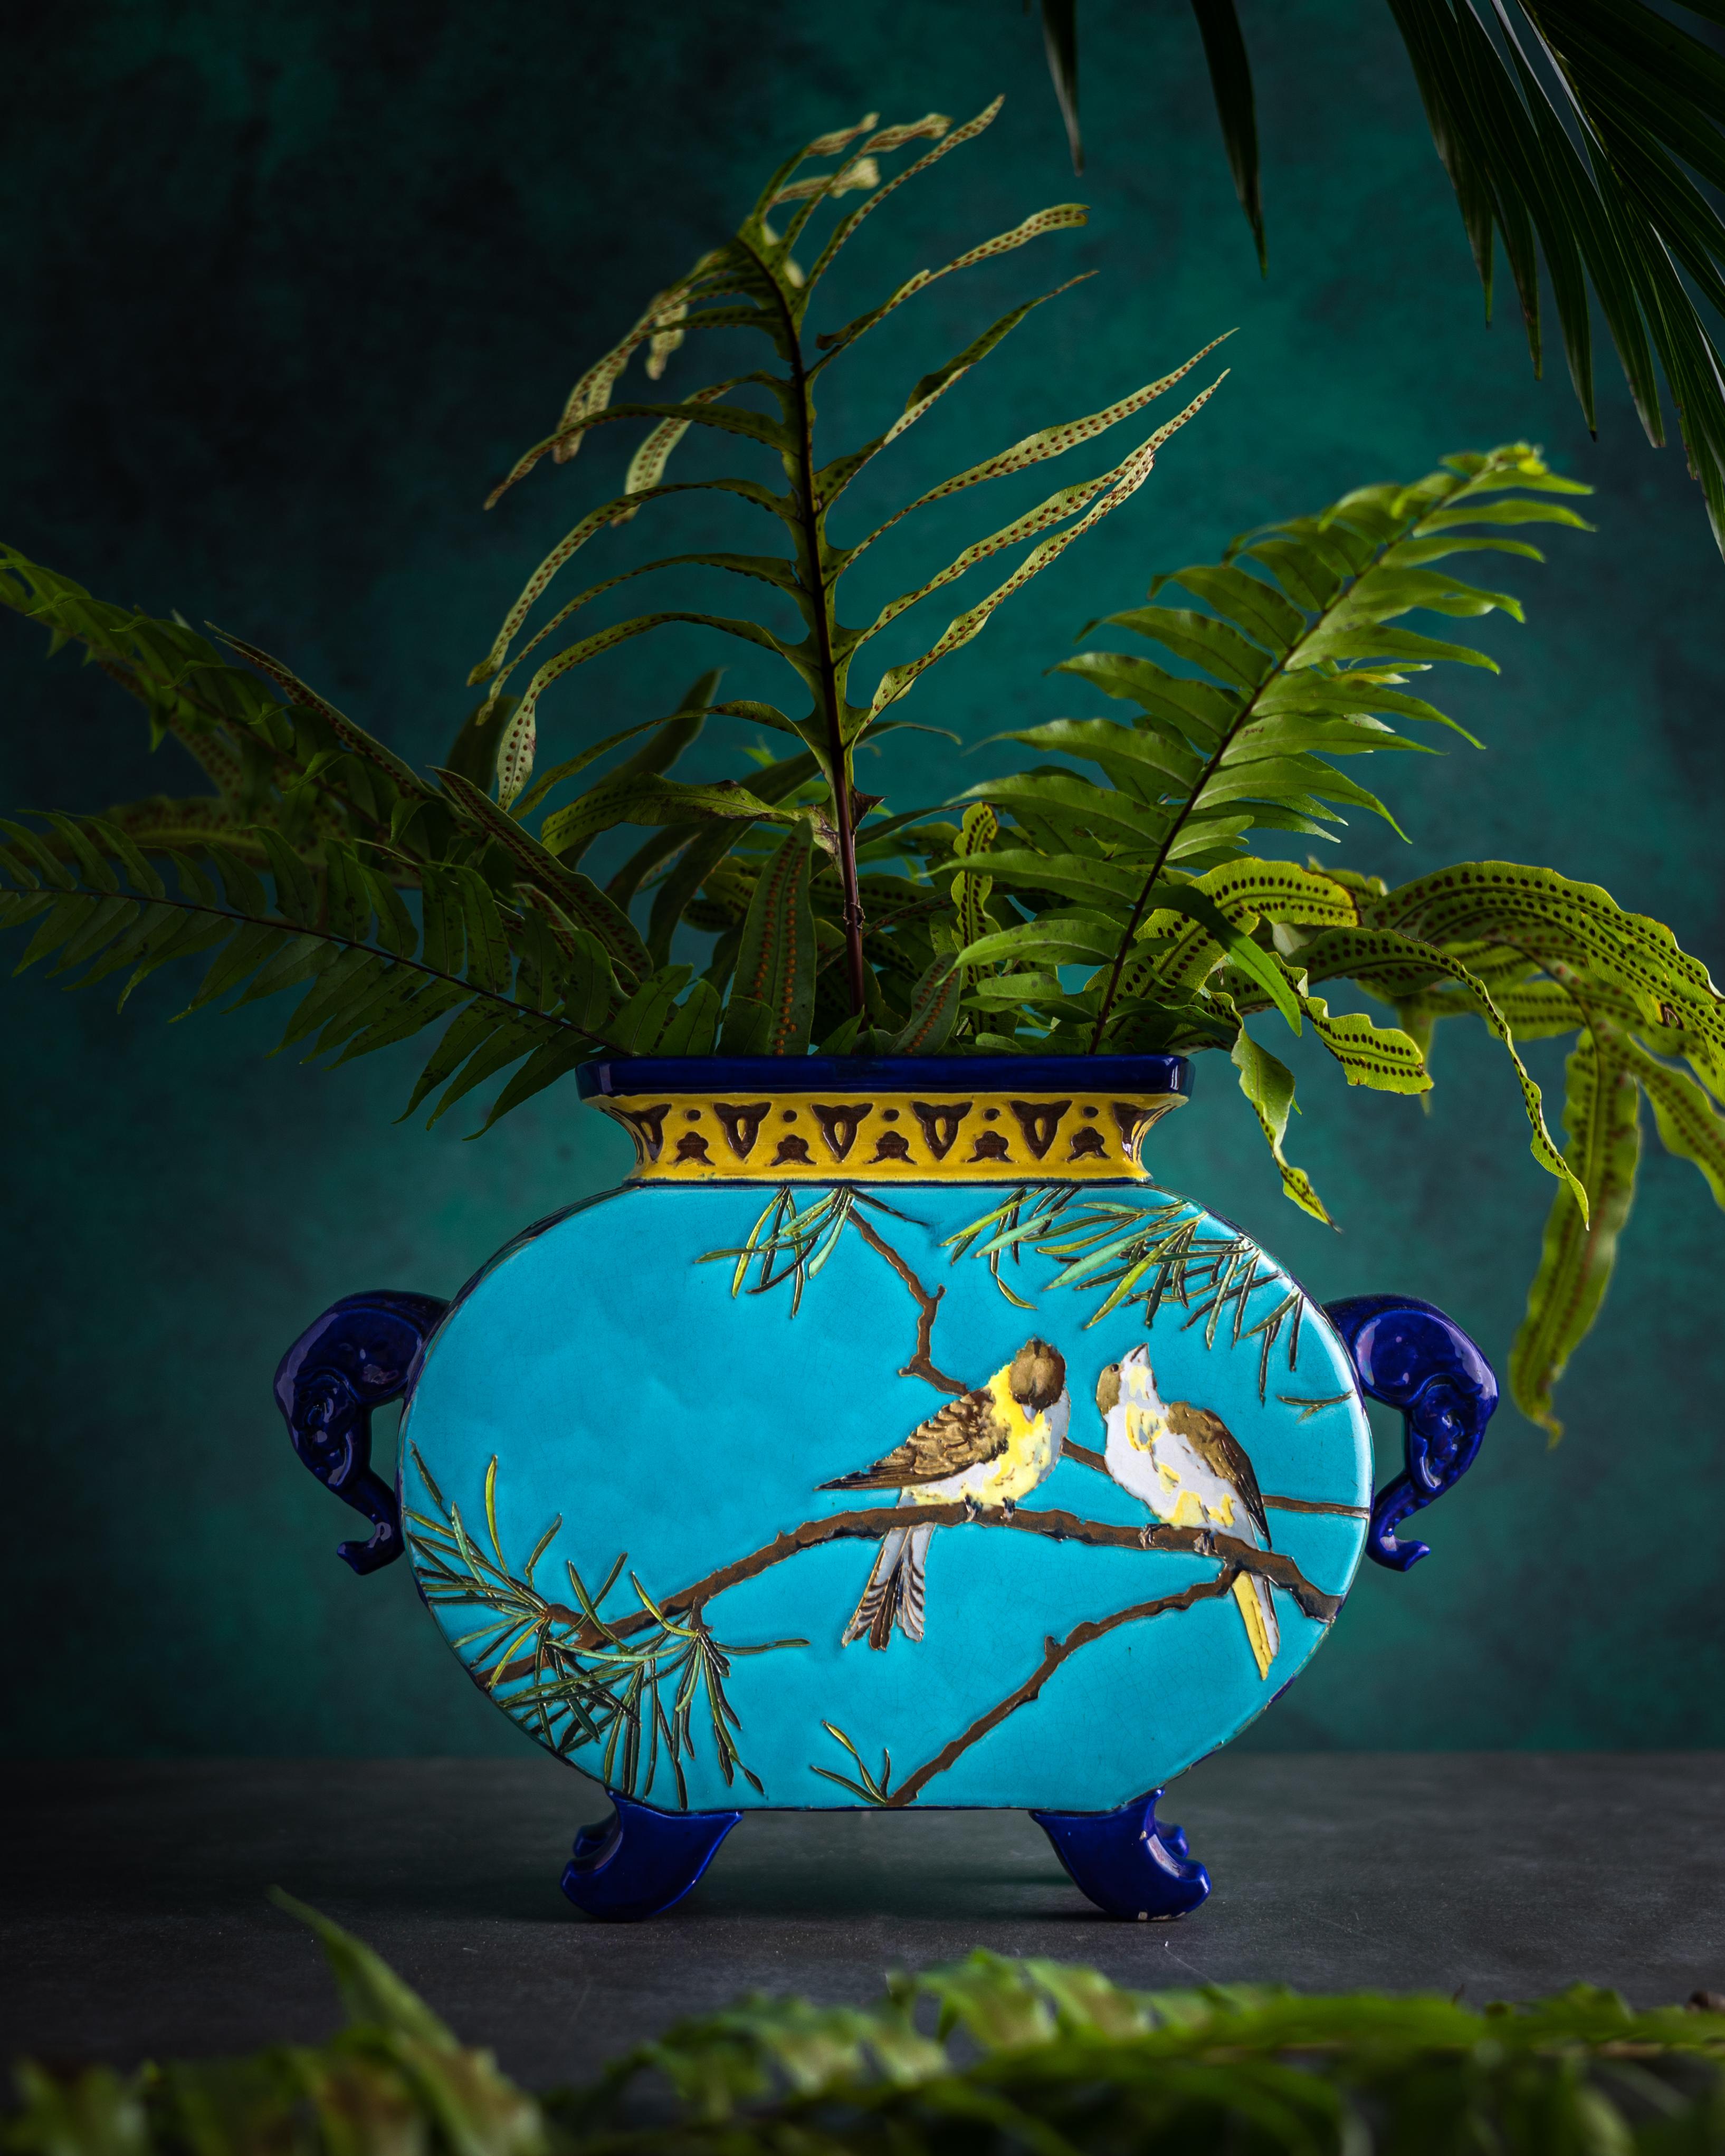 A gorgeous turquoise blue Majolica jardiniere made by the French manufactory Sarreguemines circa 1880-1890. The jardiniere is decorated in the eclectic Japonisme-style with beautifully hand-painted birds among pine branches, faux cloisonne, and